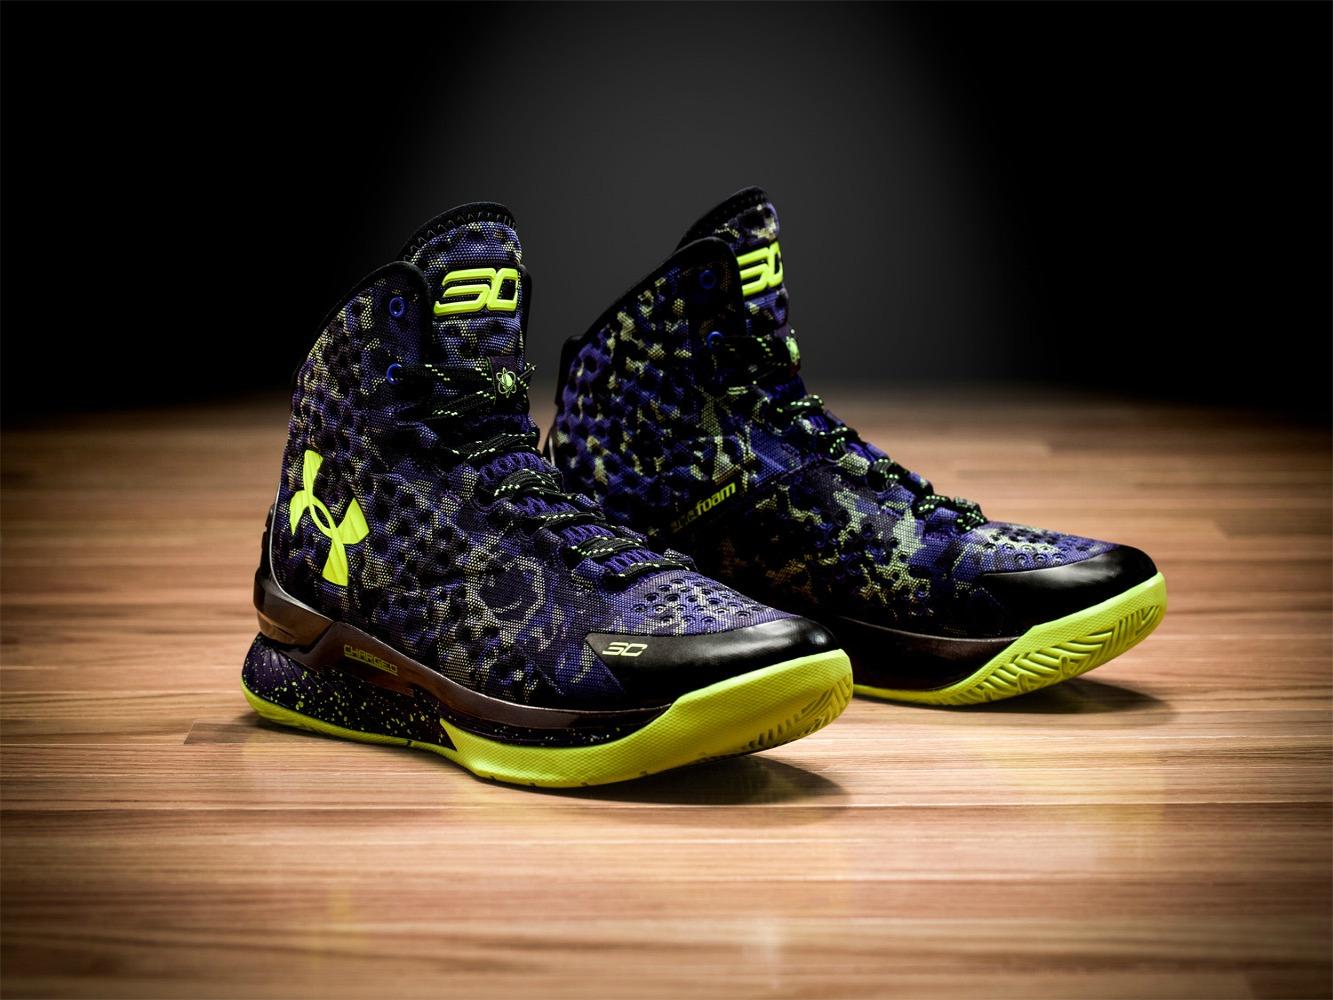 Stephen Curry Shoes Wallpapers - Wallpaper Cave